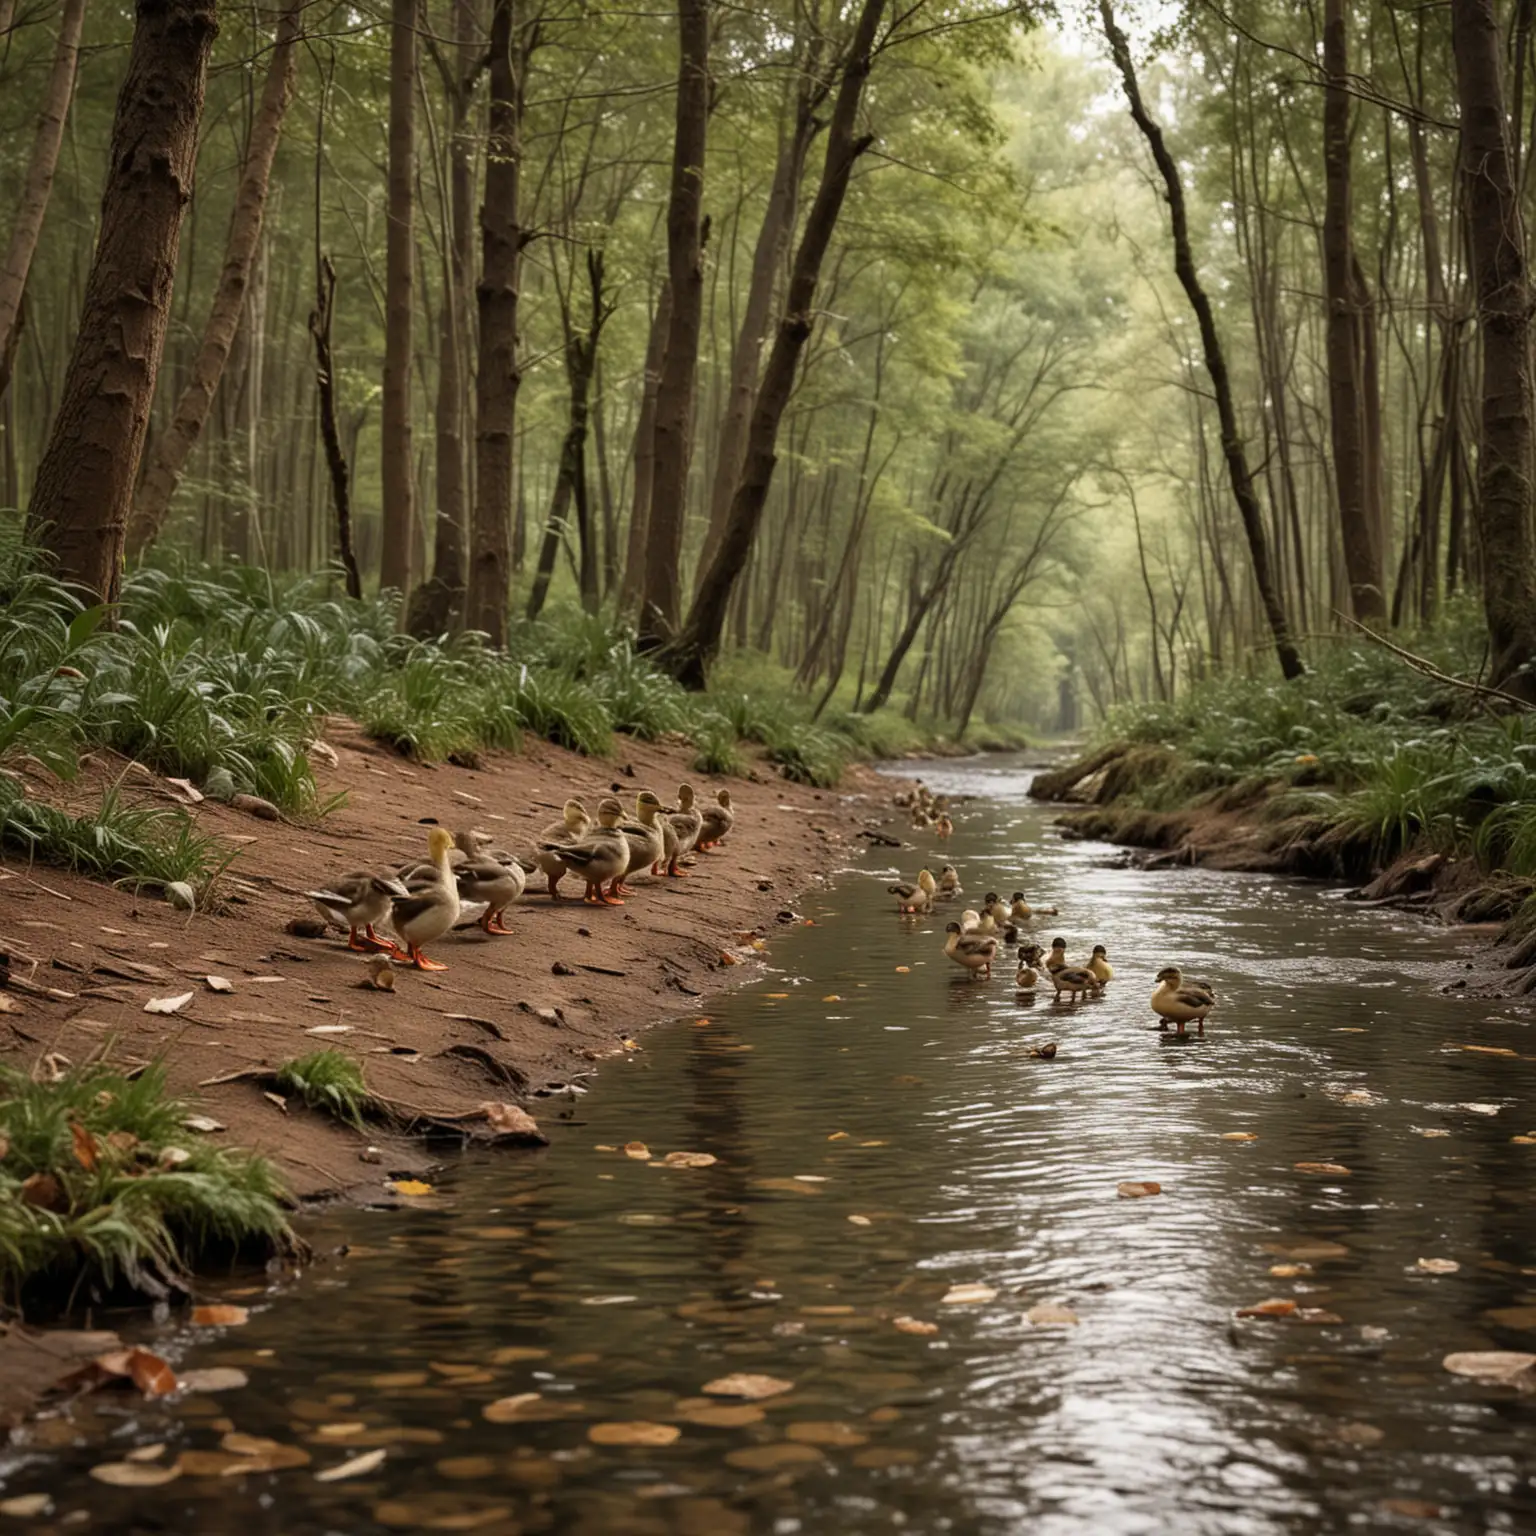 Six Little Ducks Walking Through a Forest to a River